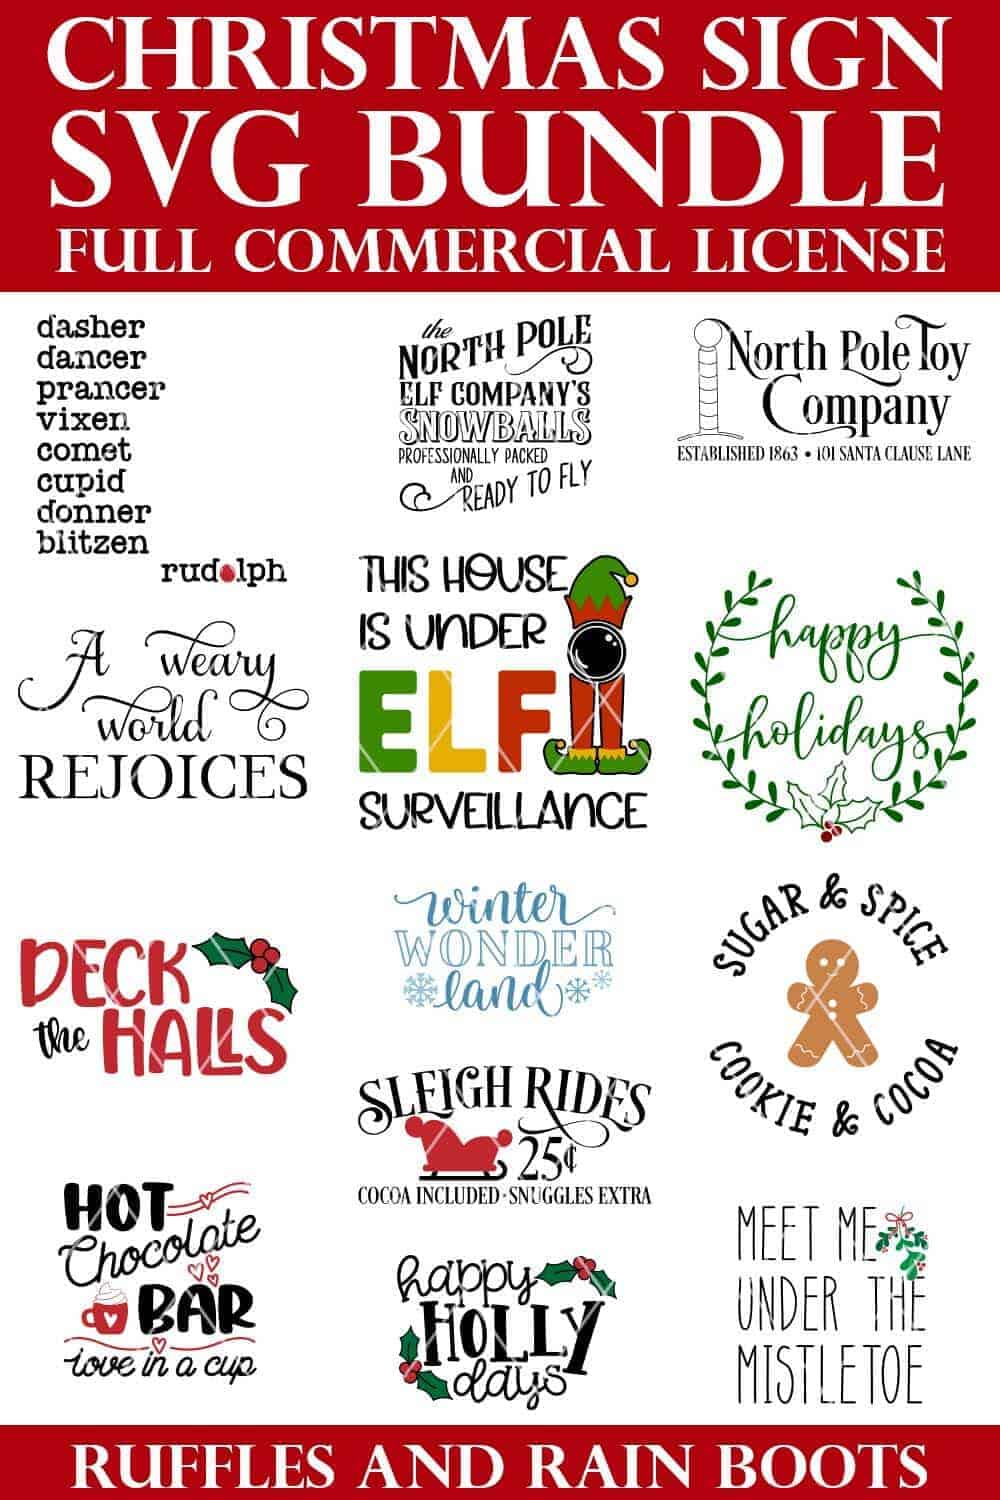 vertical image of holiday SVG bundle with text which reads Christmas sign SVG bundle full commercial license ruffles and rain boots